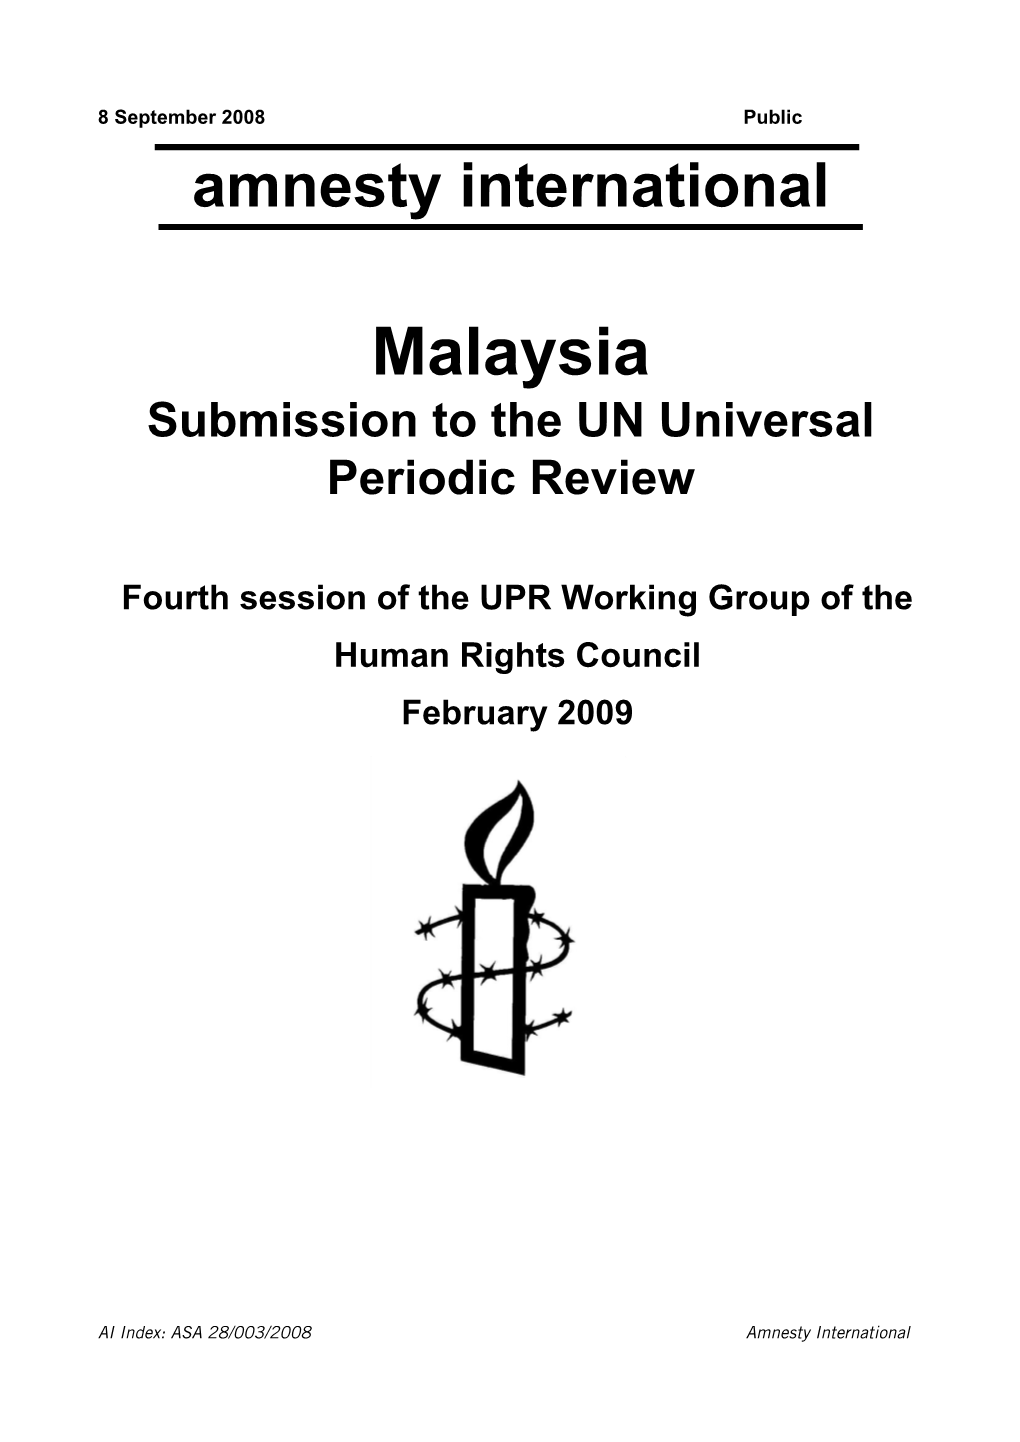 Amnesty International Submission to the UN Universal Periodic Review 2